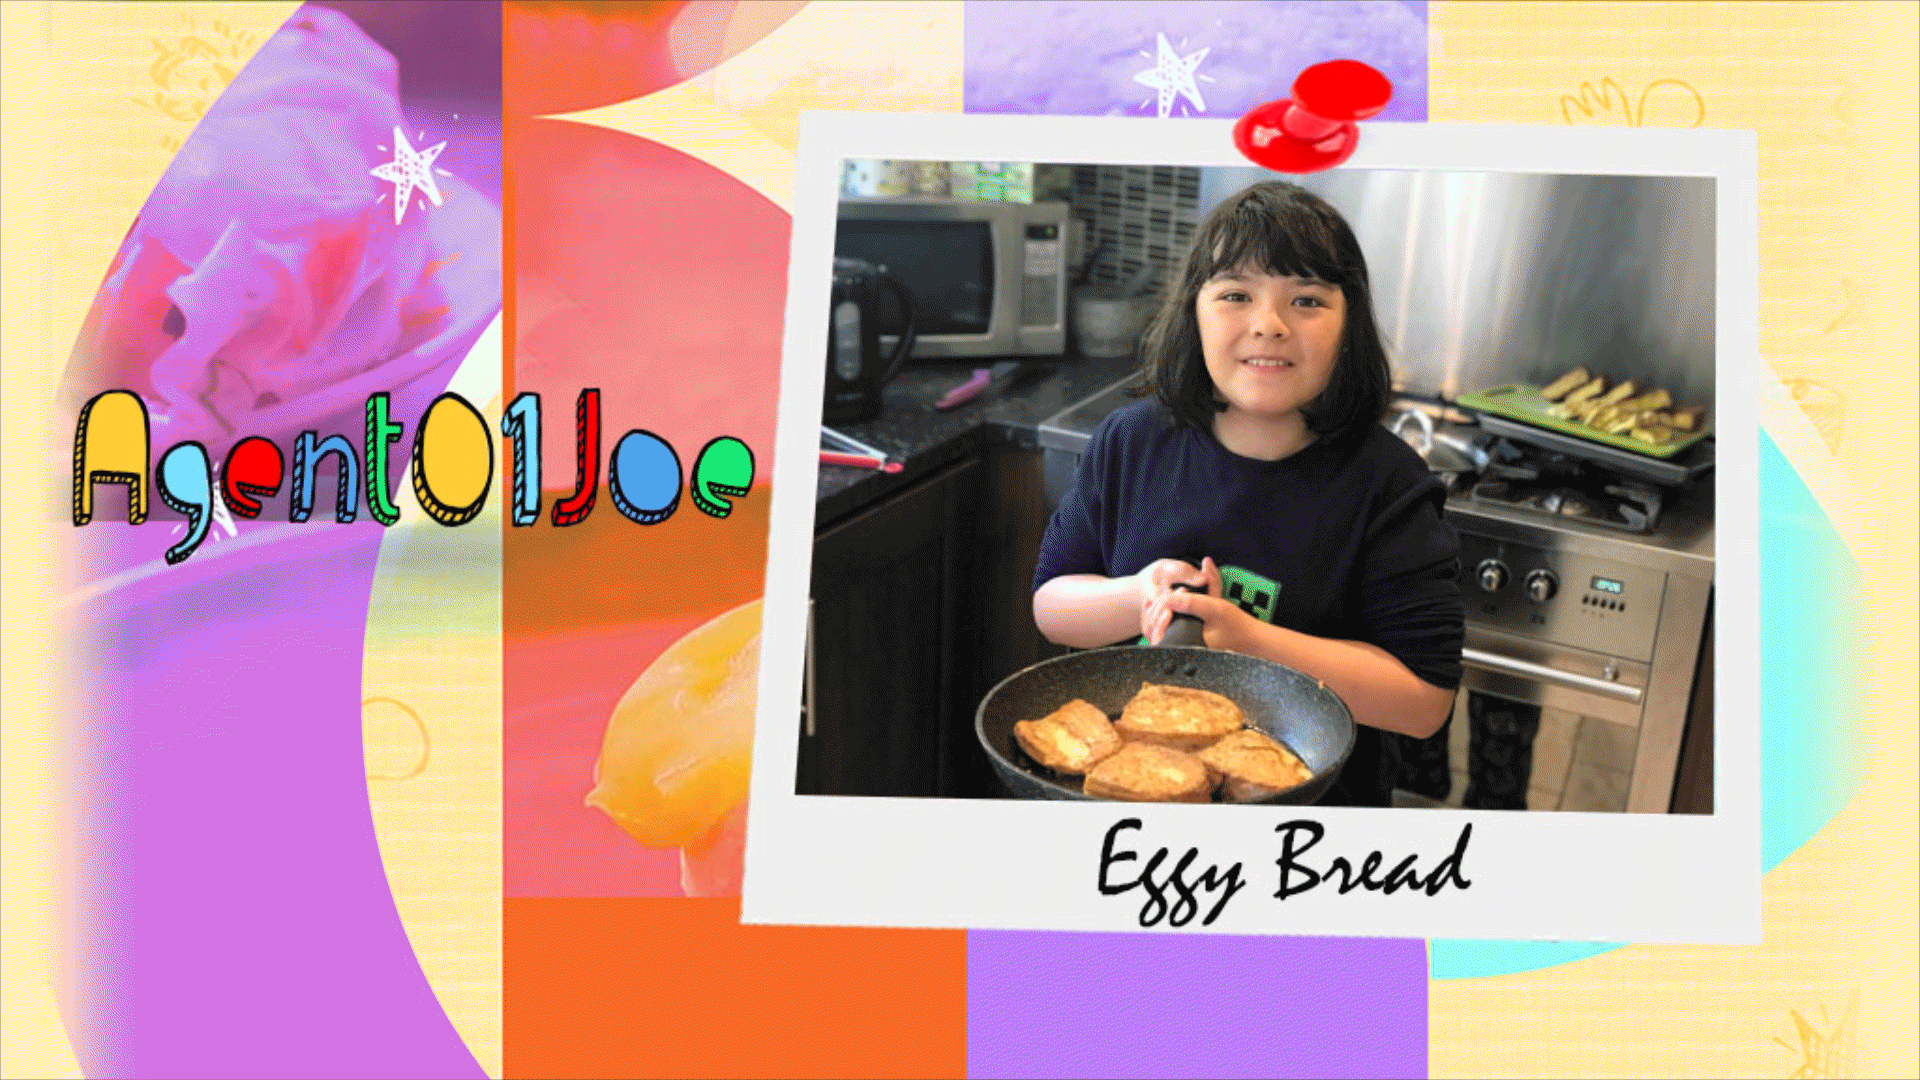 A girl shows a plate of eggy bread that she has made.